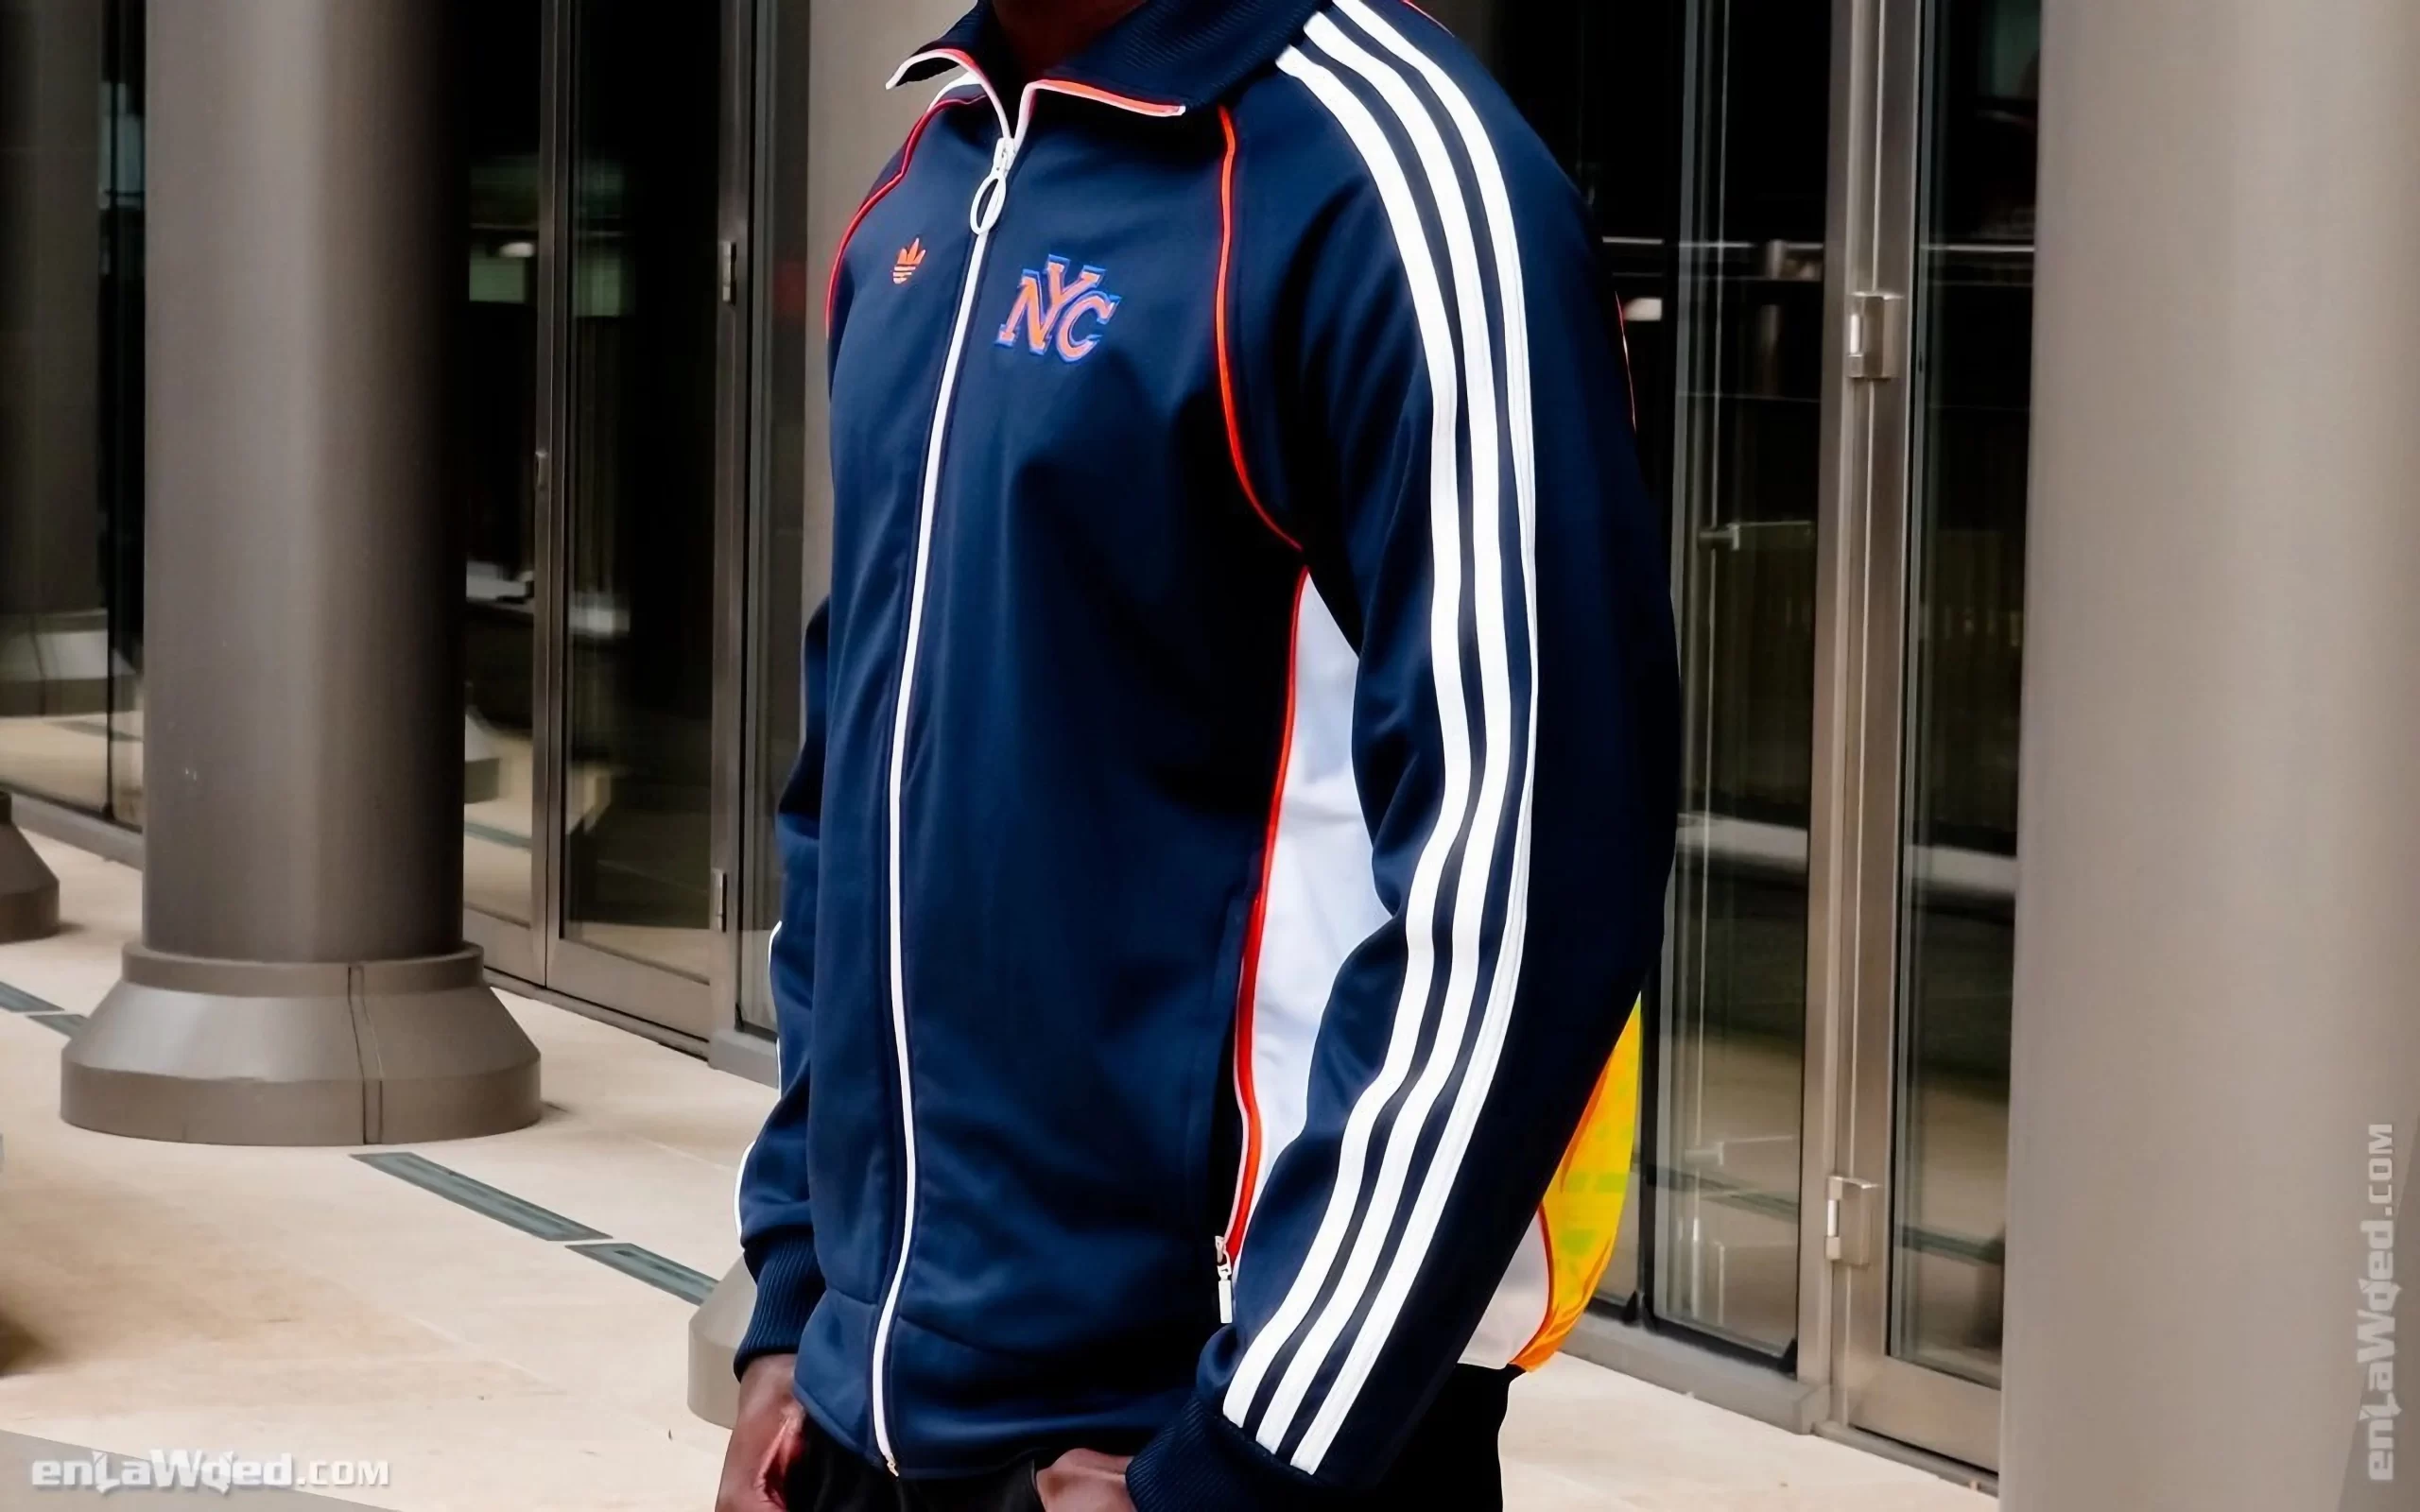 Men’s 2006 New York City Track Top by Adidas Originals: Backed (EnLawded.com file #lmchk90408ip2y123200kg9st)